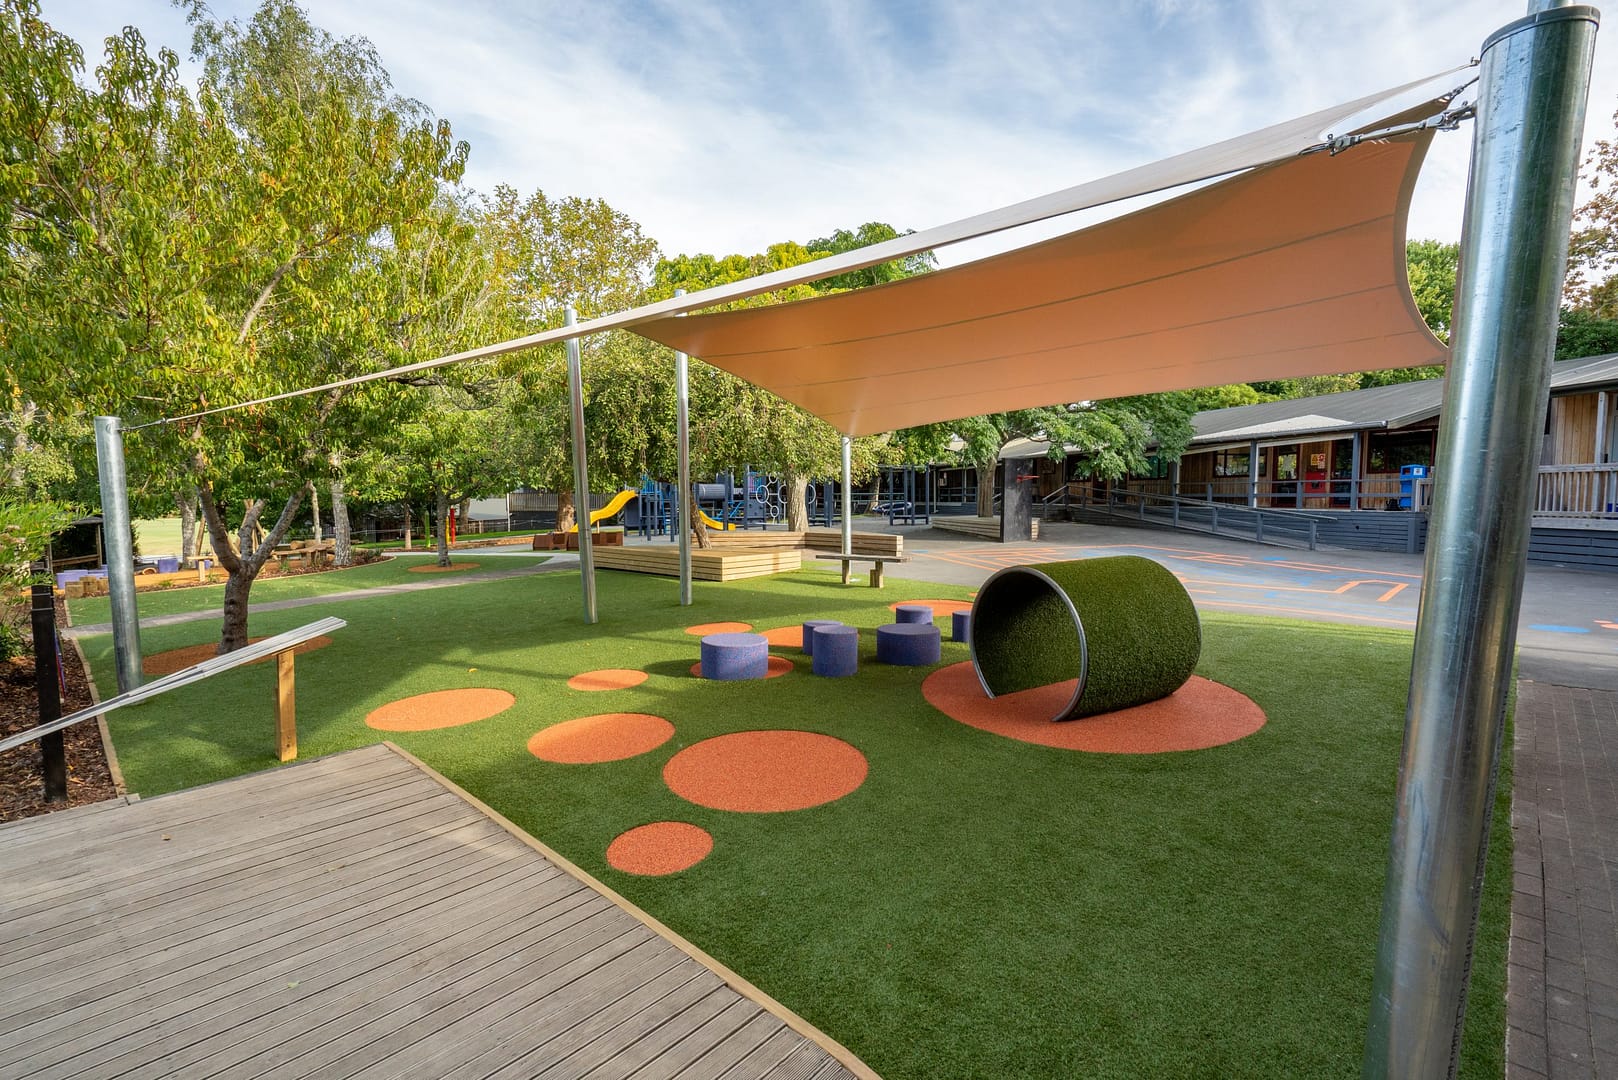 Playground design enables schools to incorporate their own themes into their play spaces. 